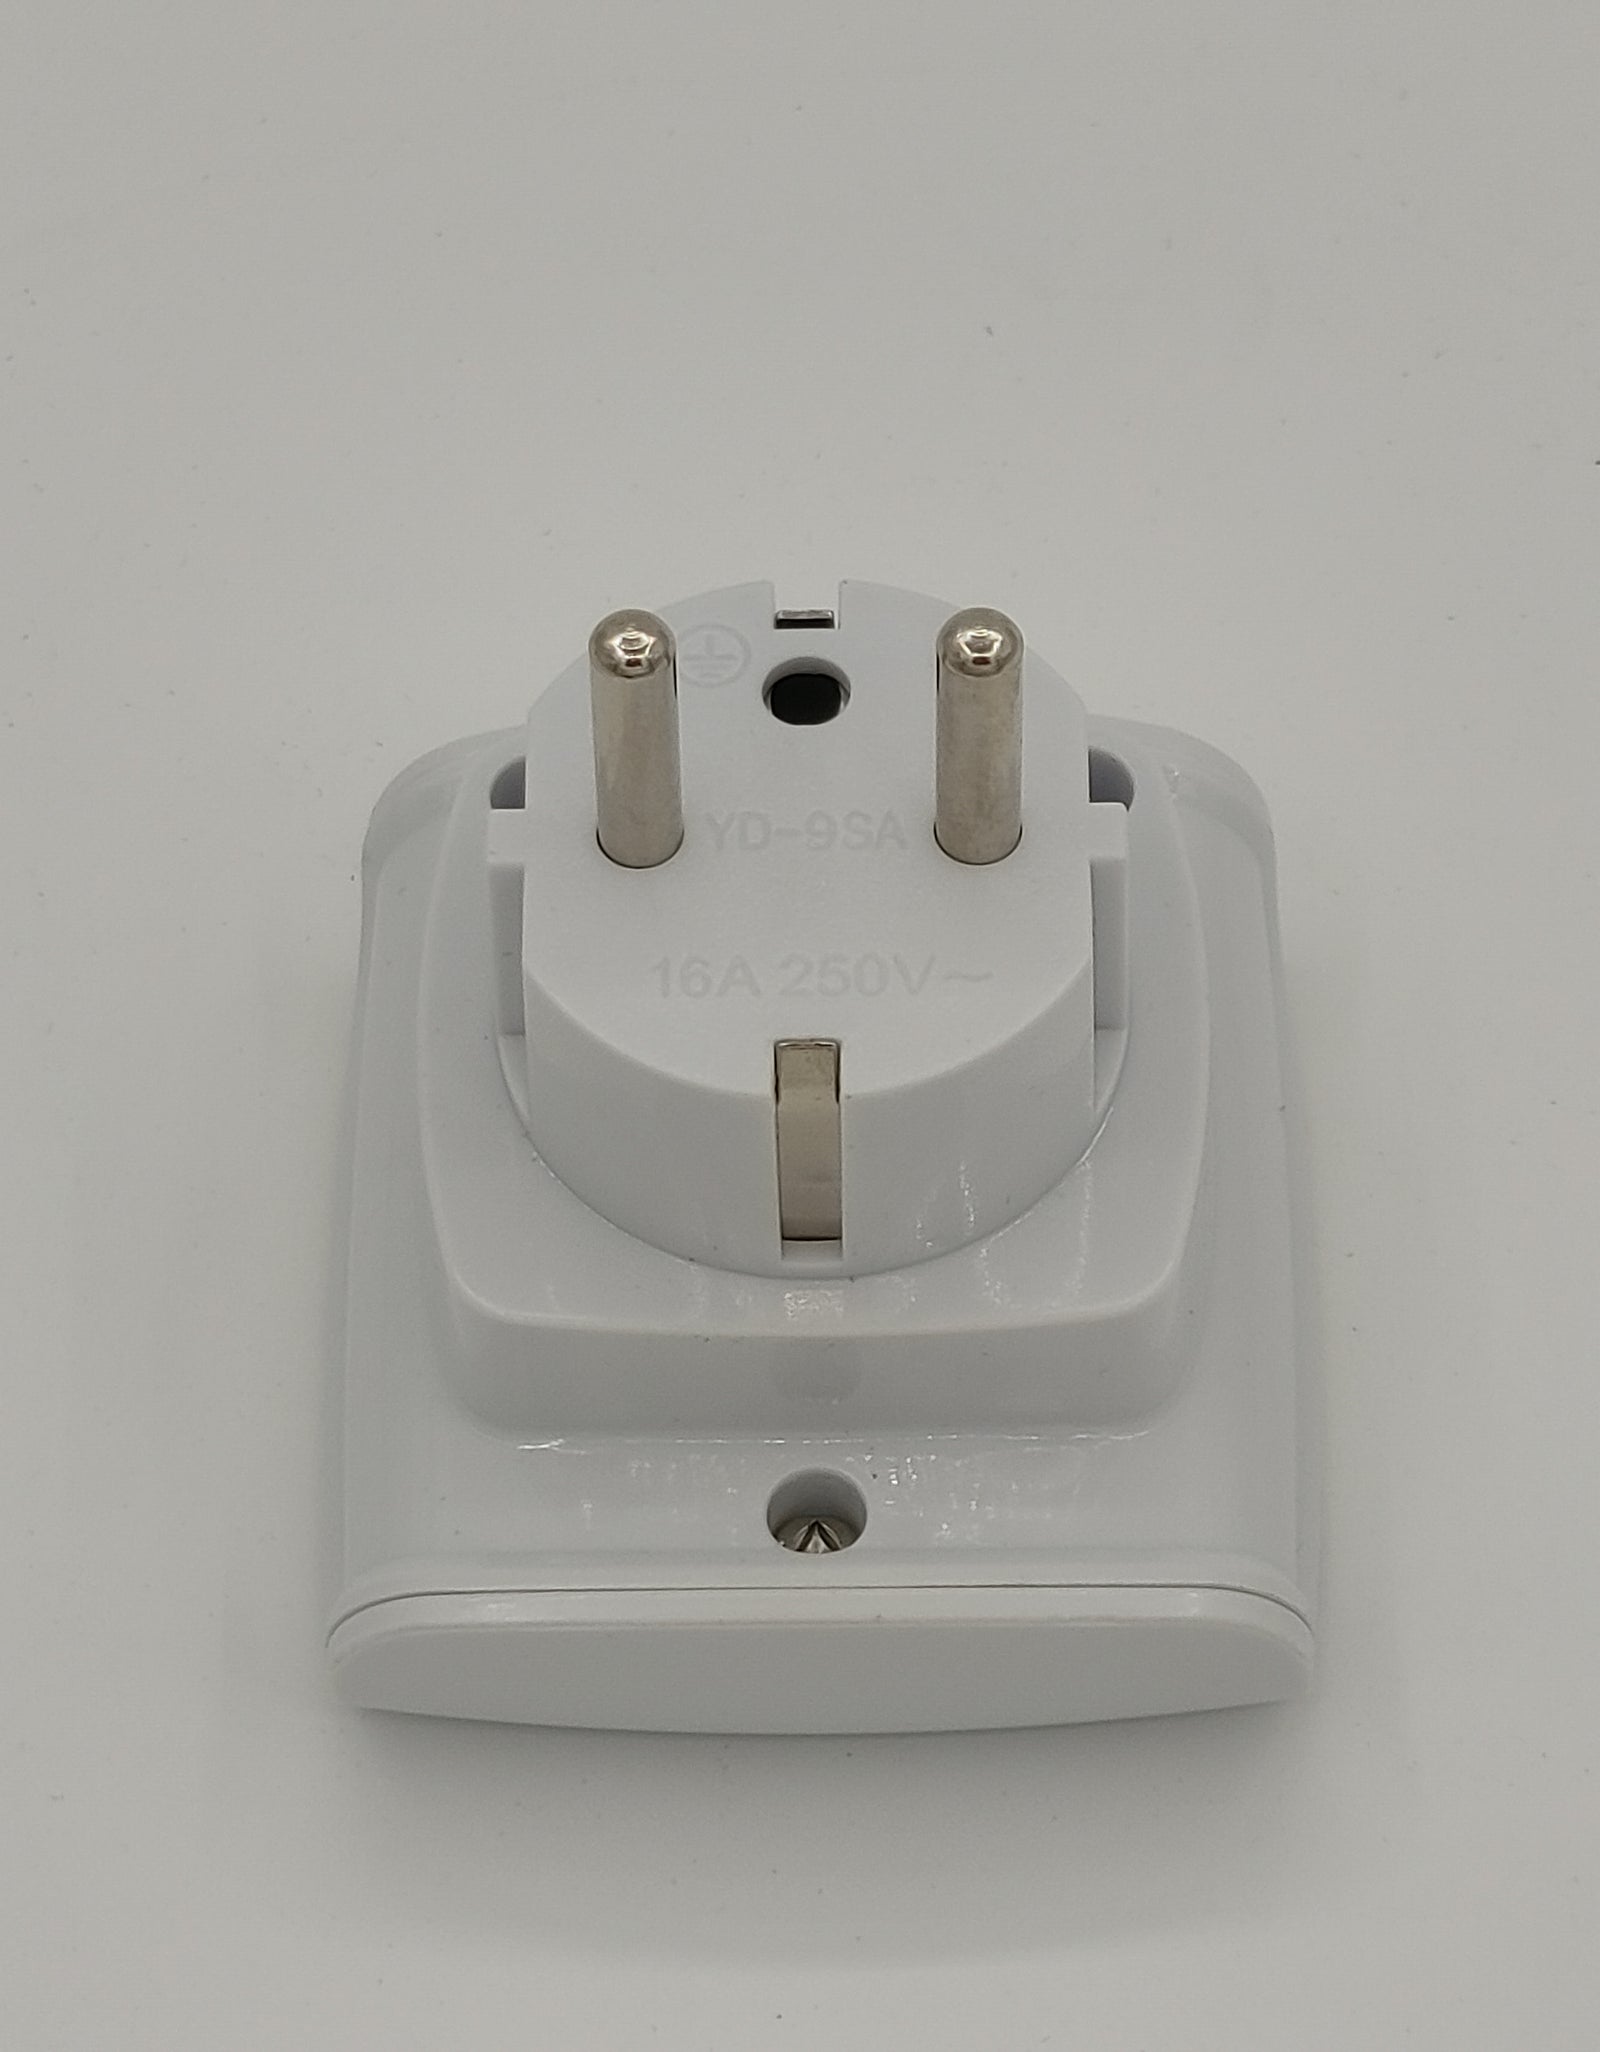 Euro To S.A. Travel Adaptor